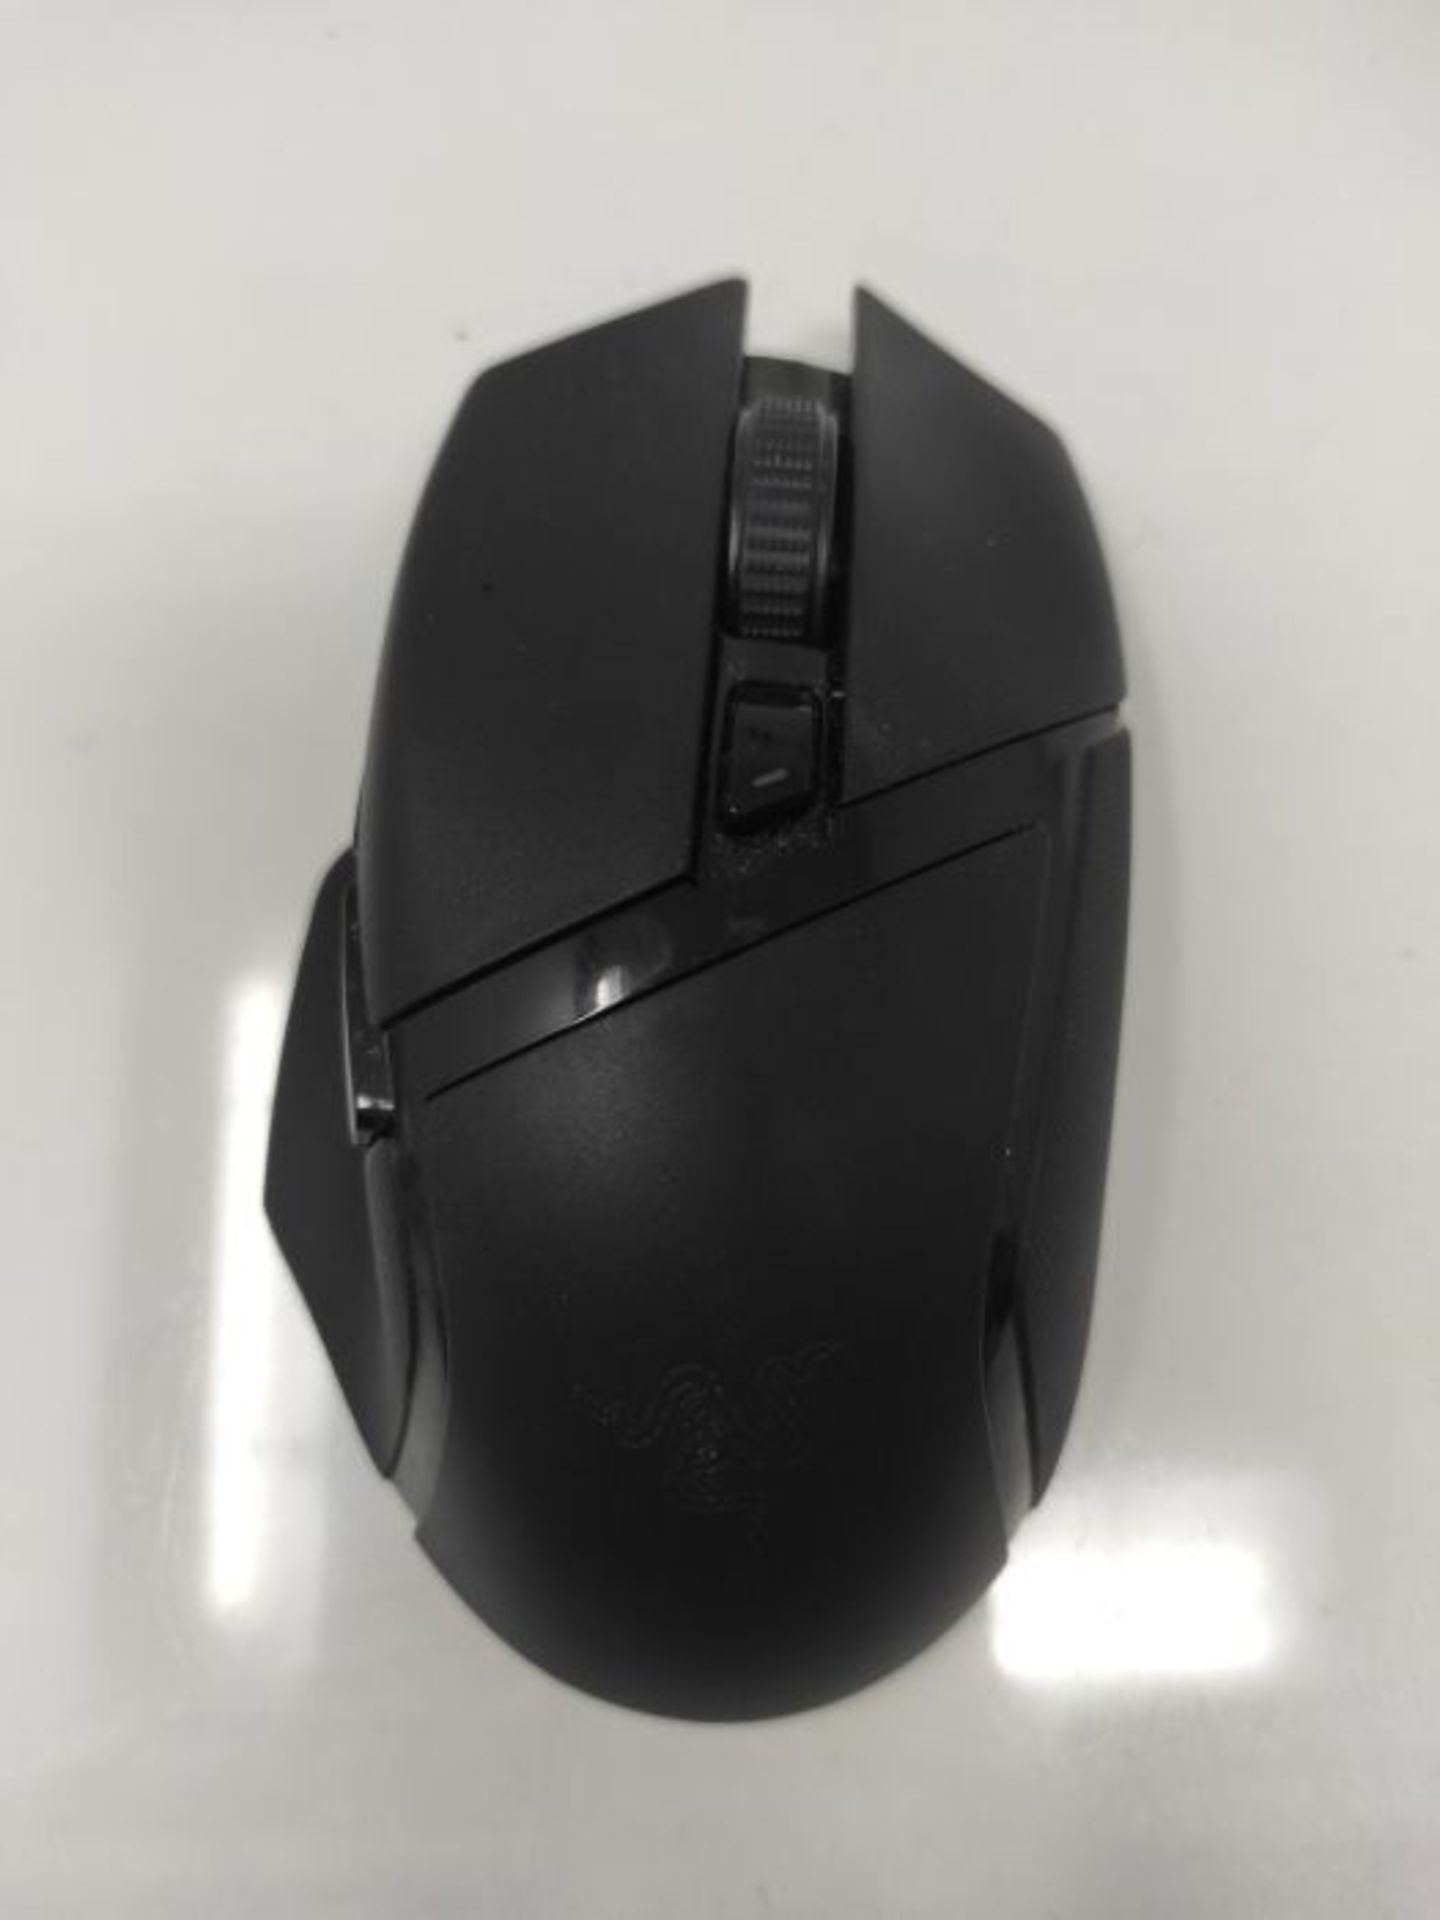 [INCOMPLETE] Razer Basilisk X Hyperspeed - Wireless Gaming Mouse (Hyperspeed Technolog - Image 2 of 2